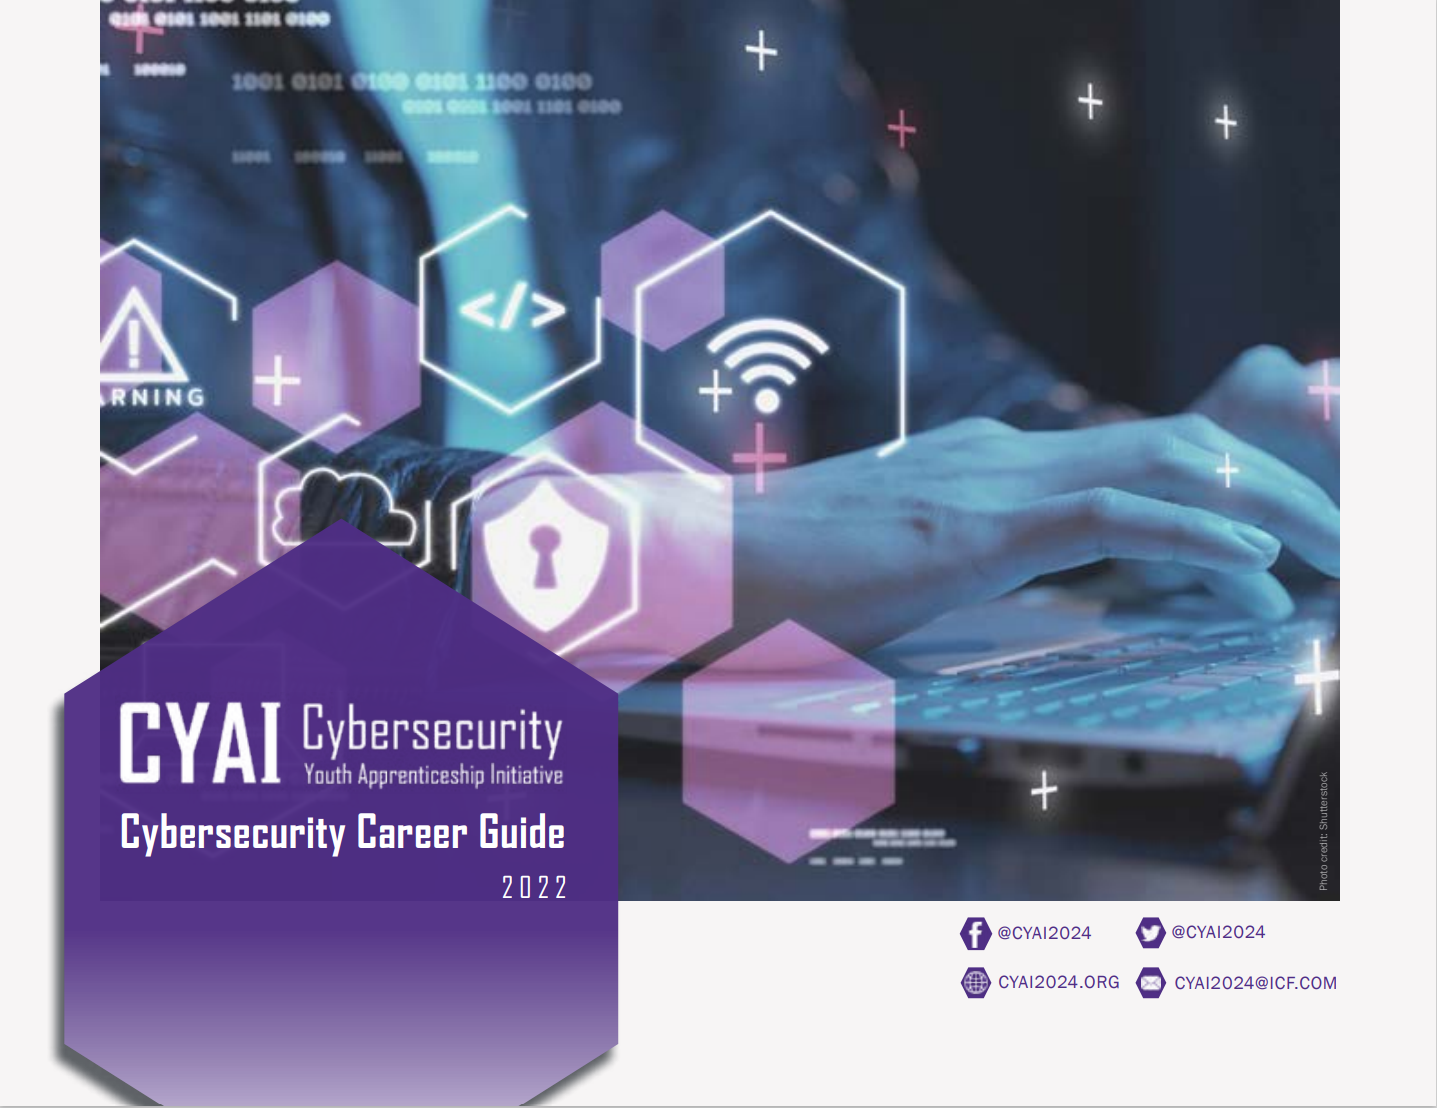 Preview of the first page of the document that includes text/graphics to describe cybersecurity careers.